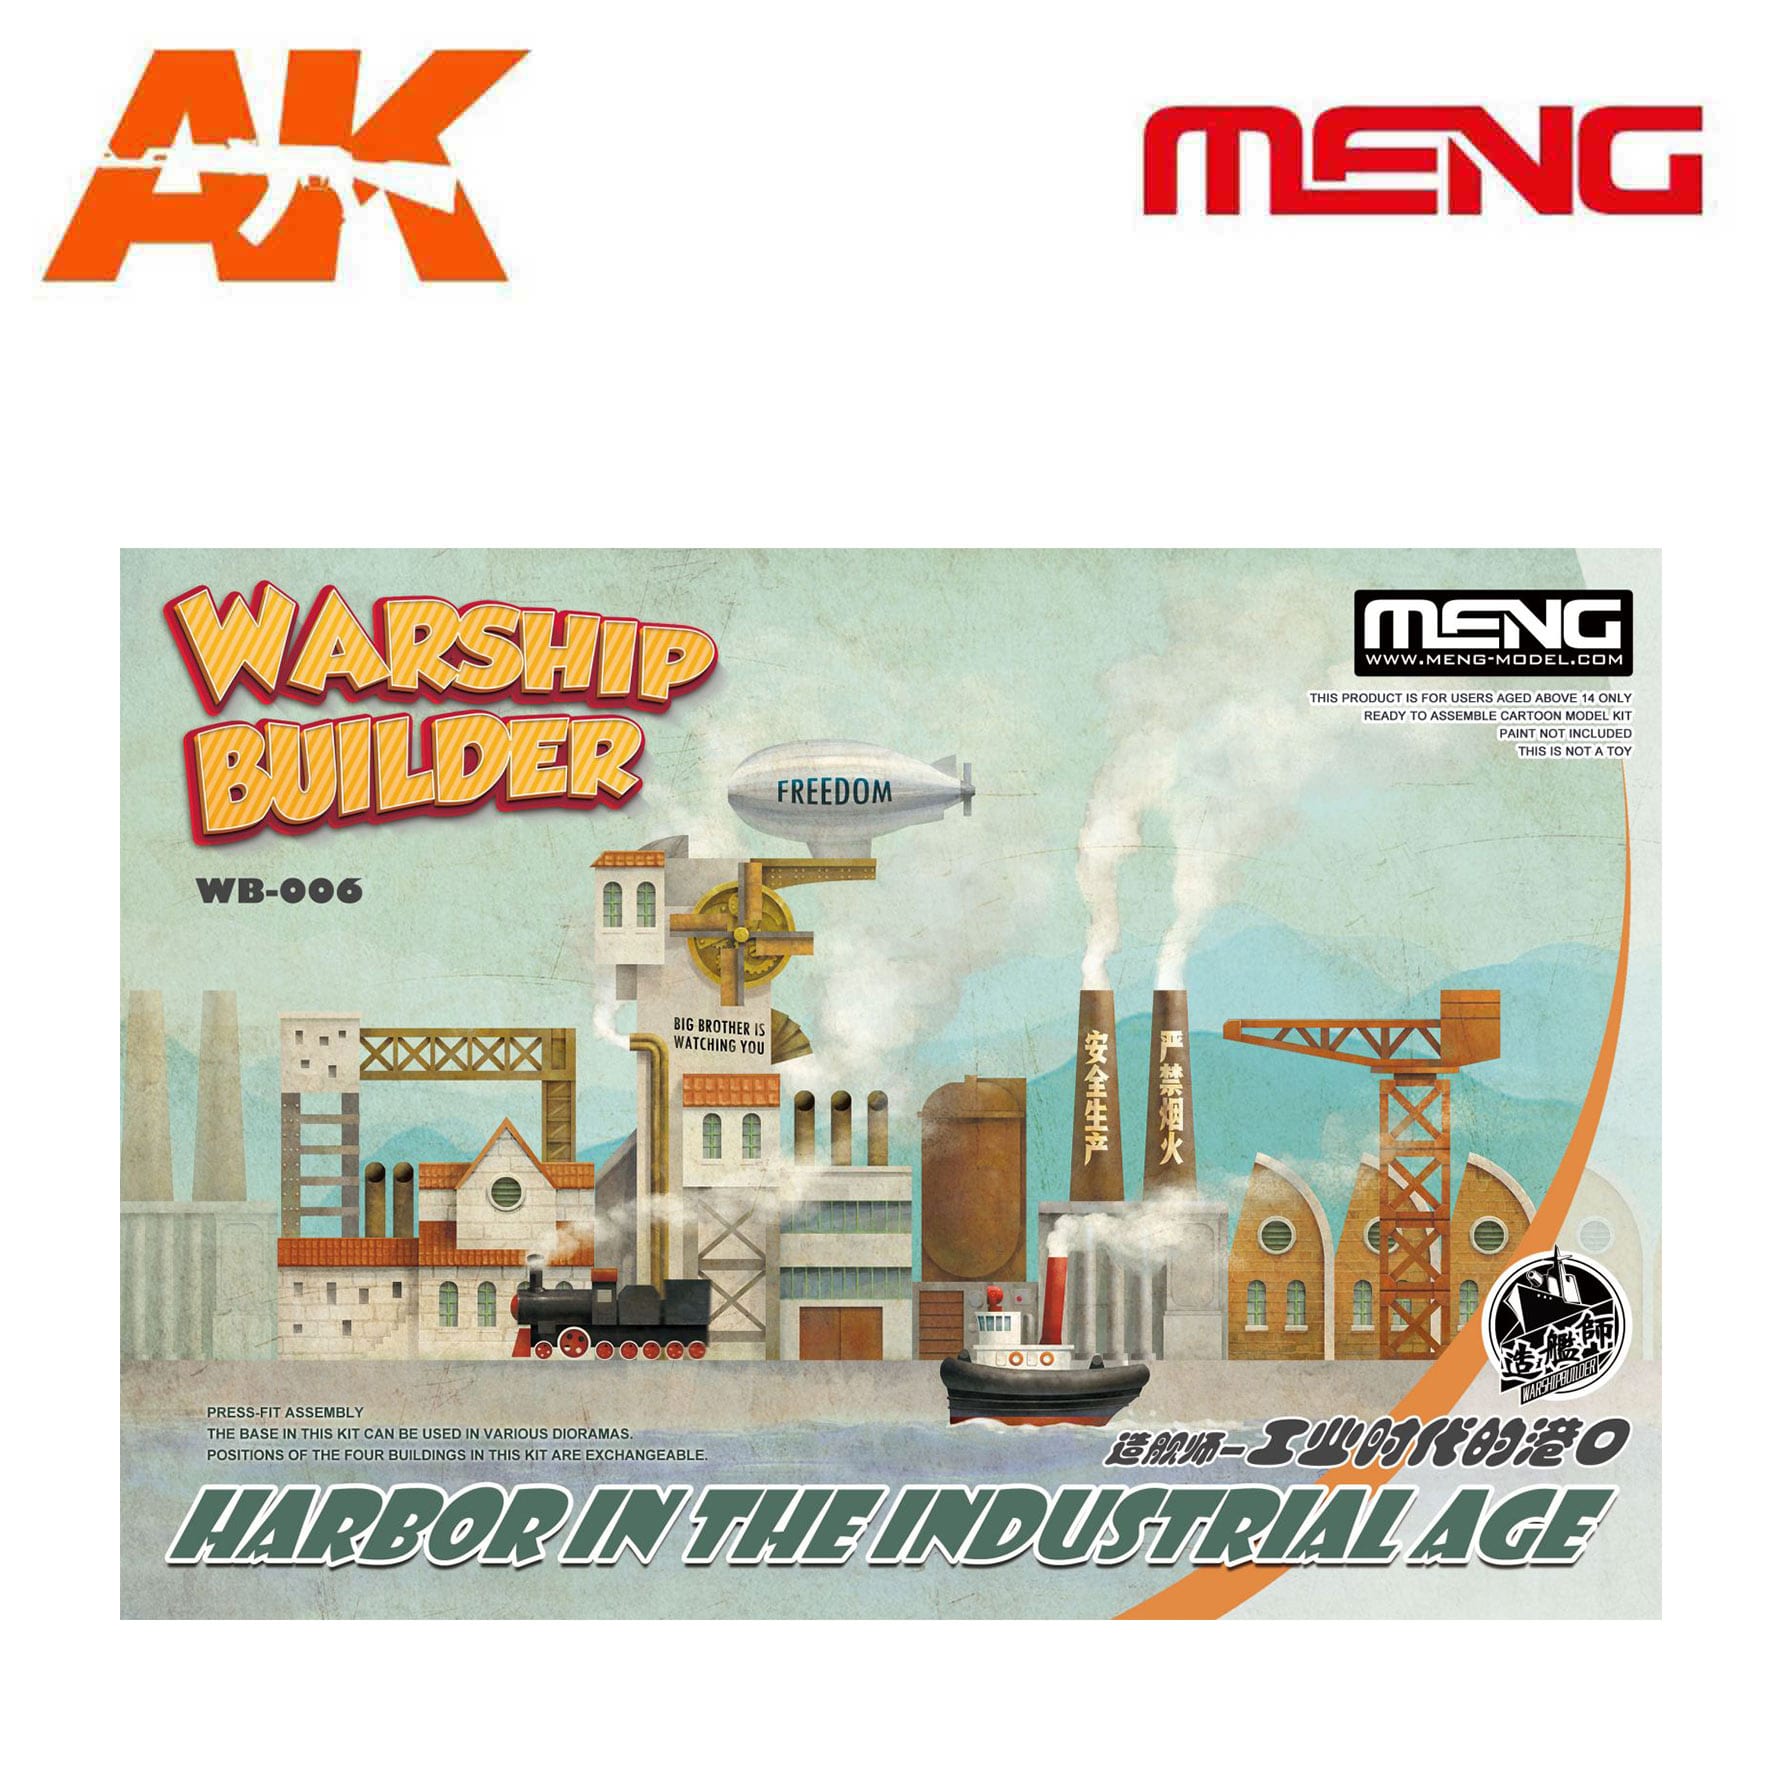 WARSHIP BUILDER – HARBOR IN THE INDUSTRIAL AGE